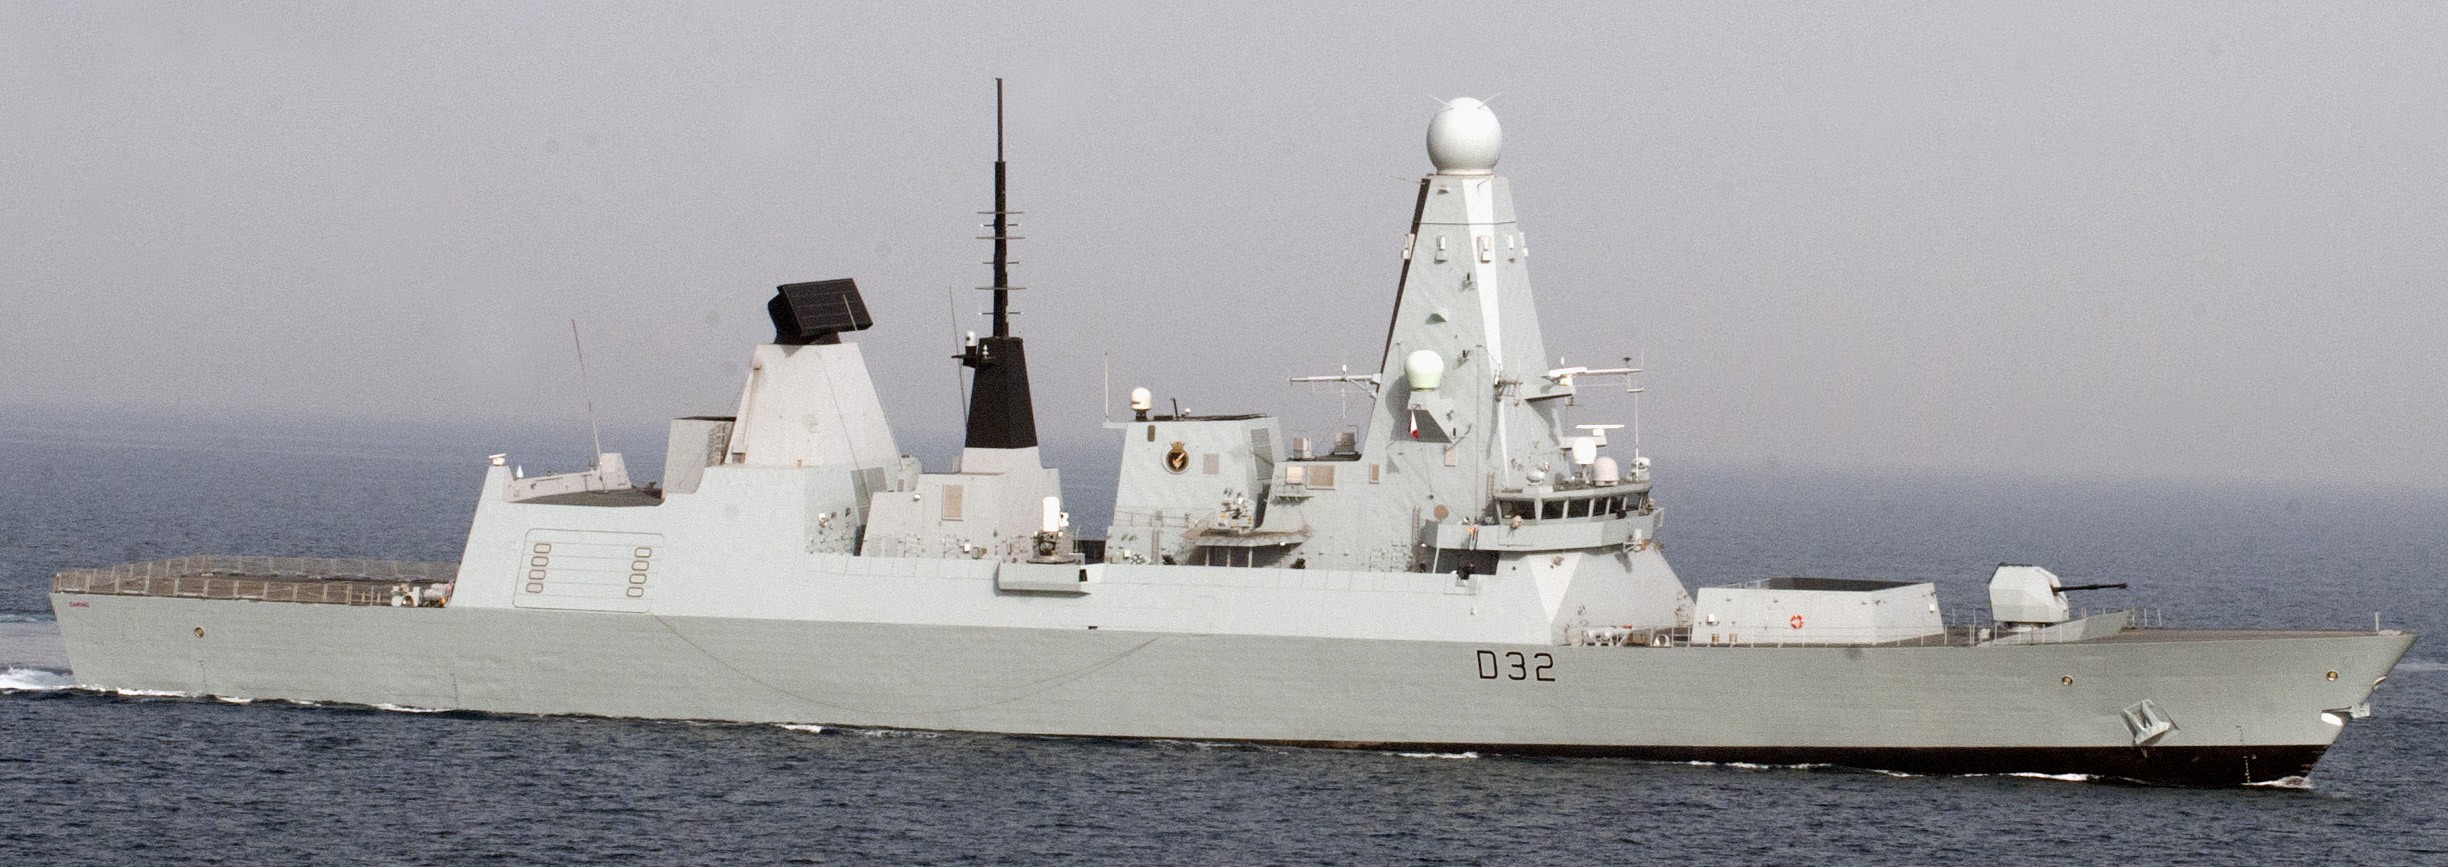 hms daring d-32 type 45 class guided missile destroyer royal navy sea viper paams 07